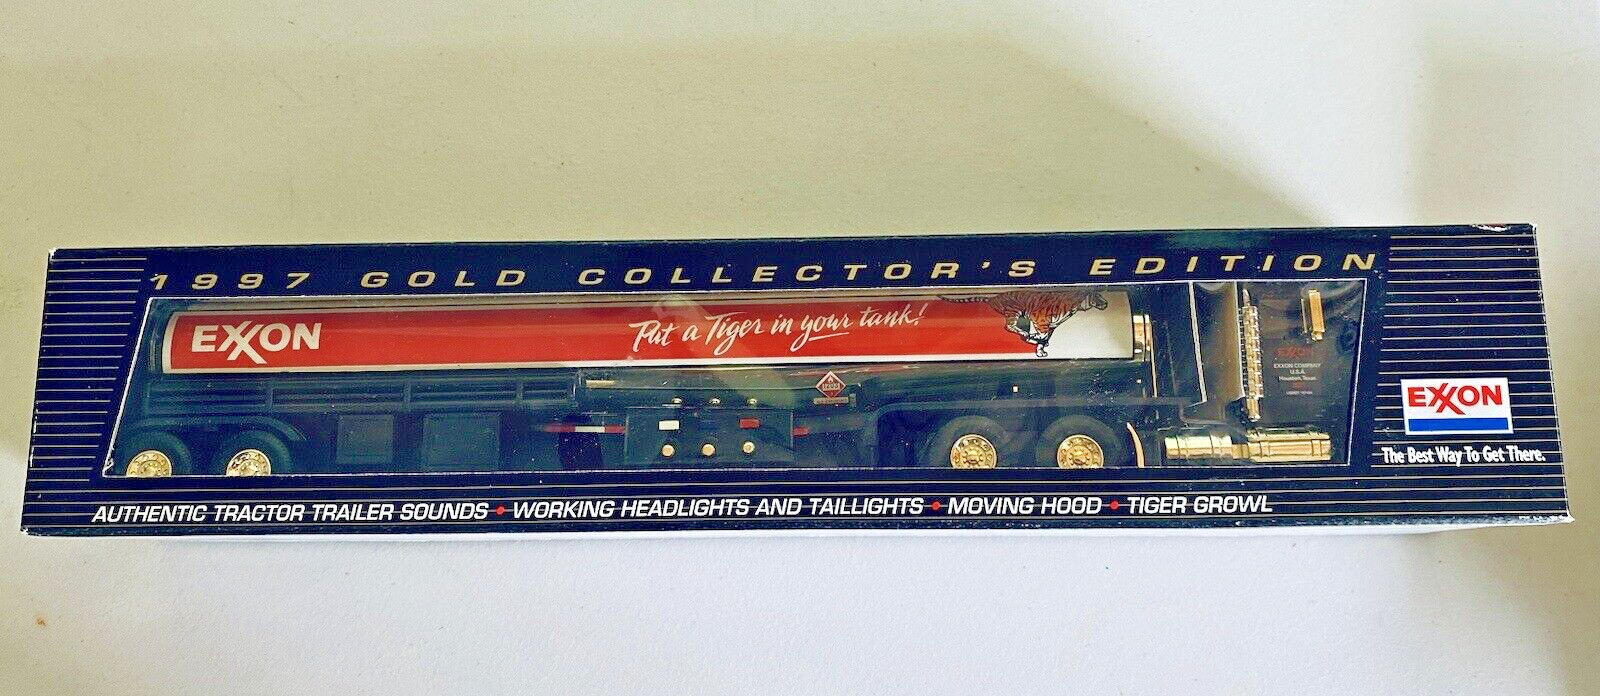 1997 EXXON GOLD COLLECTOR\'S EDITION TANKER TRUCK 6th IN A SERIES Mint in Box